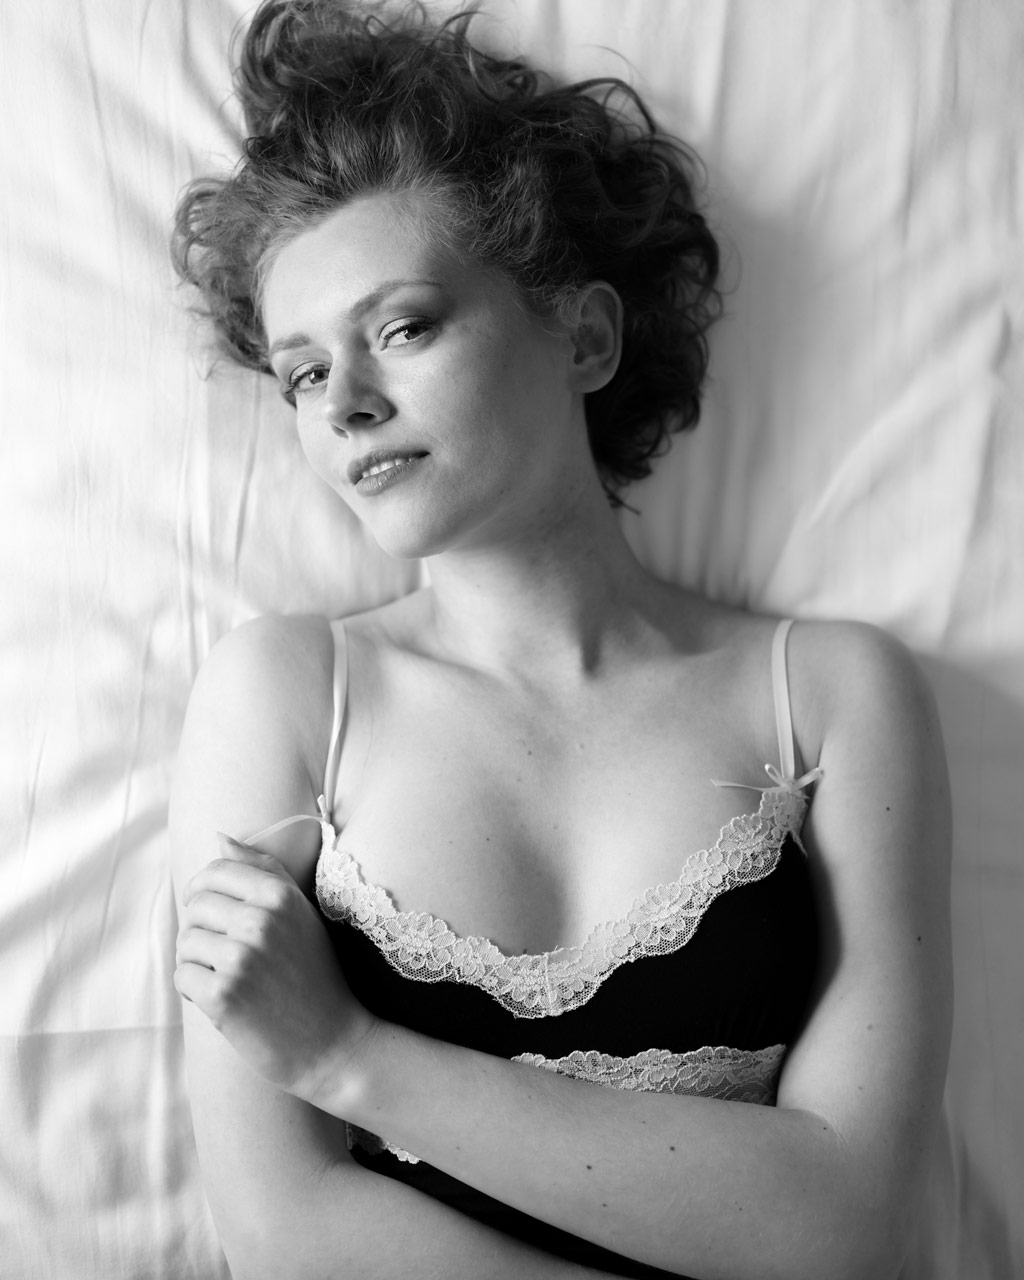 Get started with boudoir photography